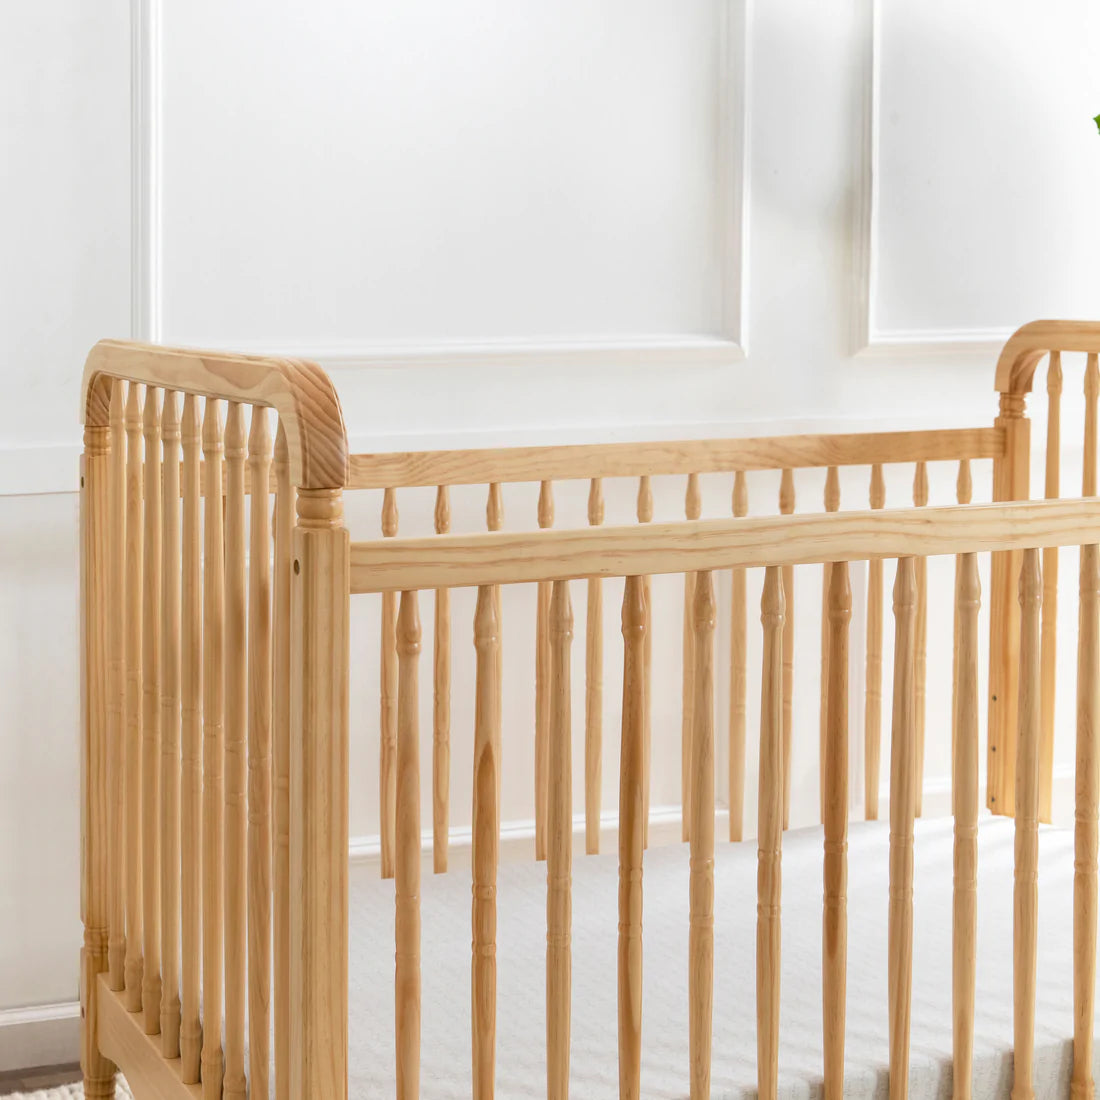 Liberty 3-in-1 Convertible Spindle Crib